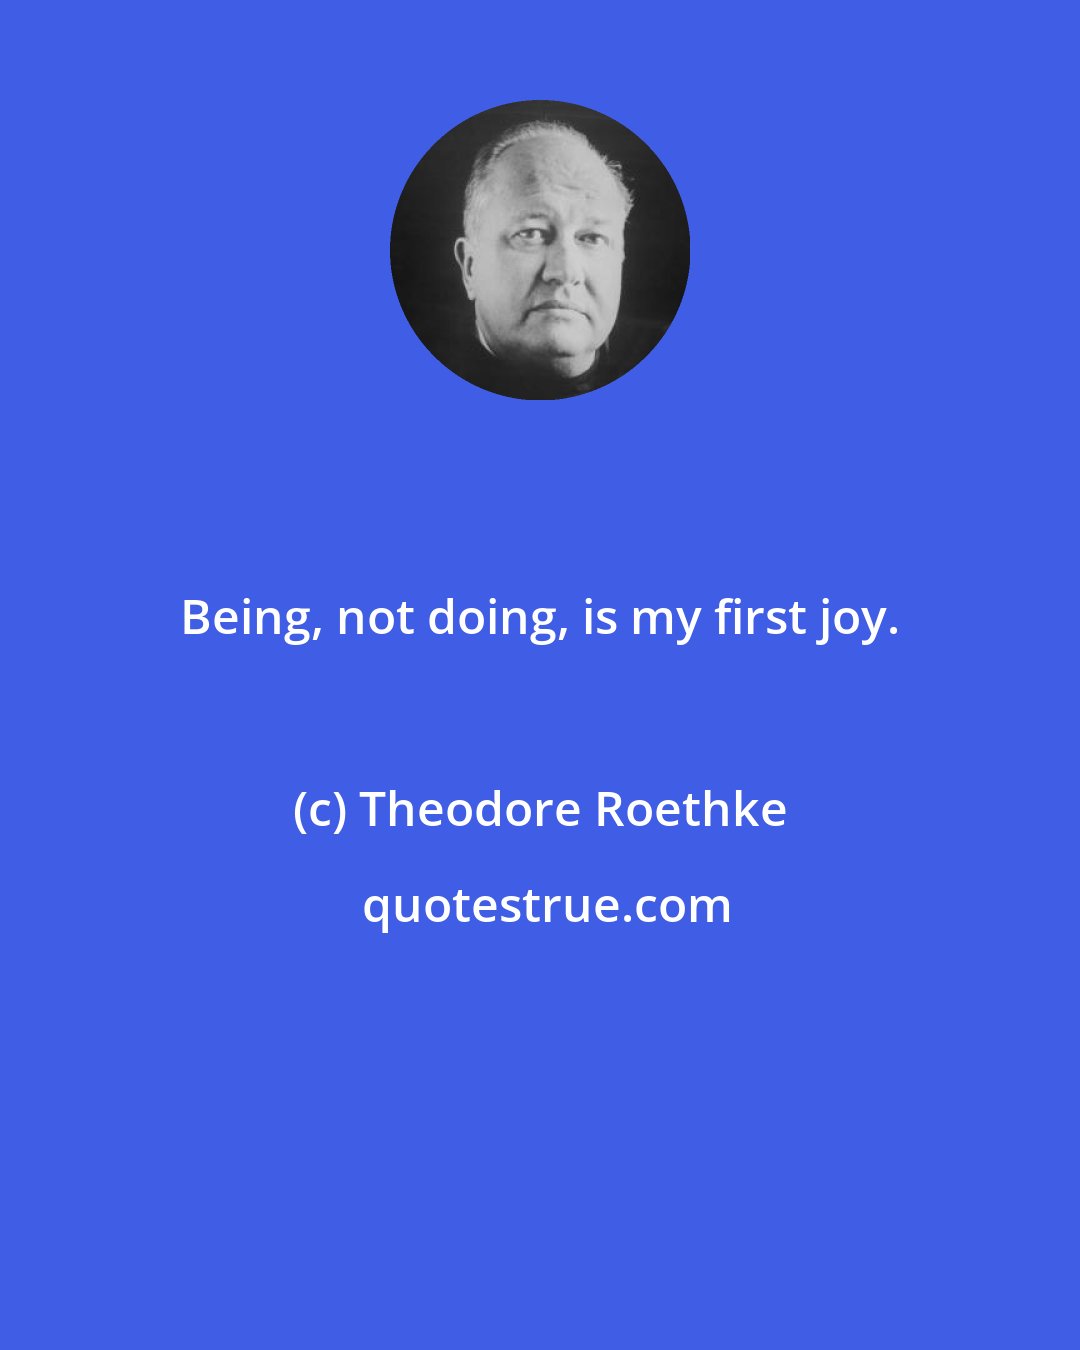 Theodore Roethke: Being, not doing, is my first joy.